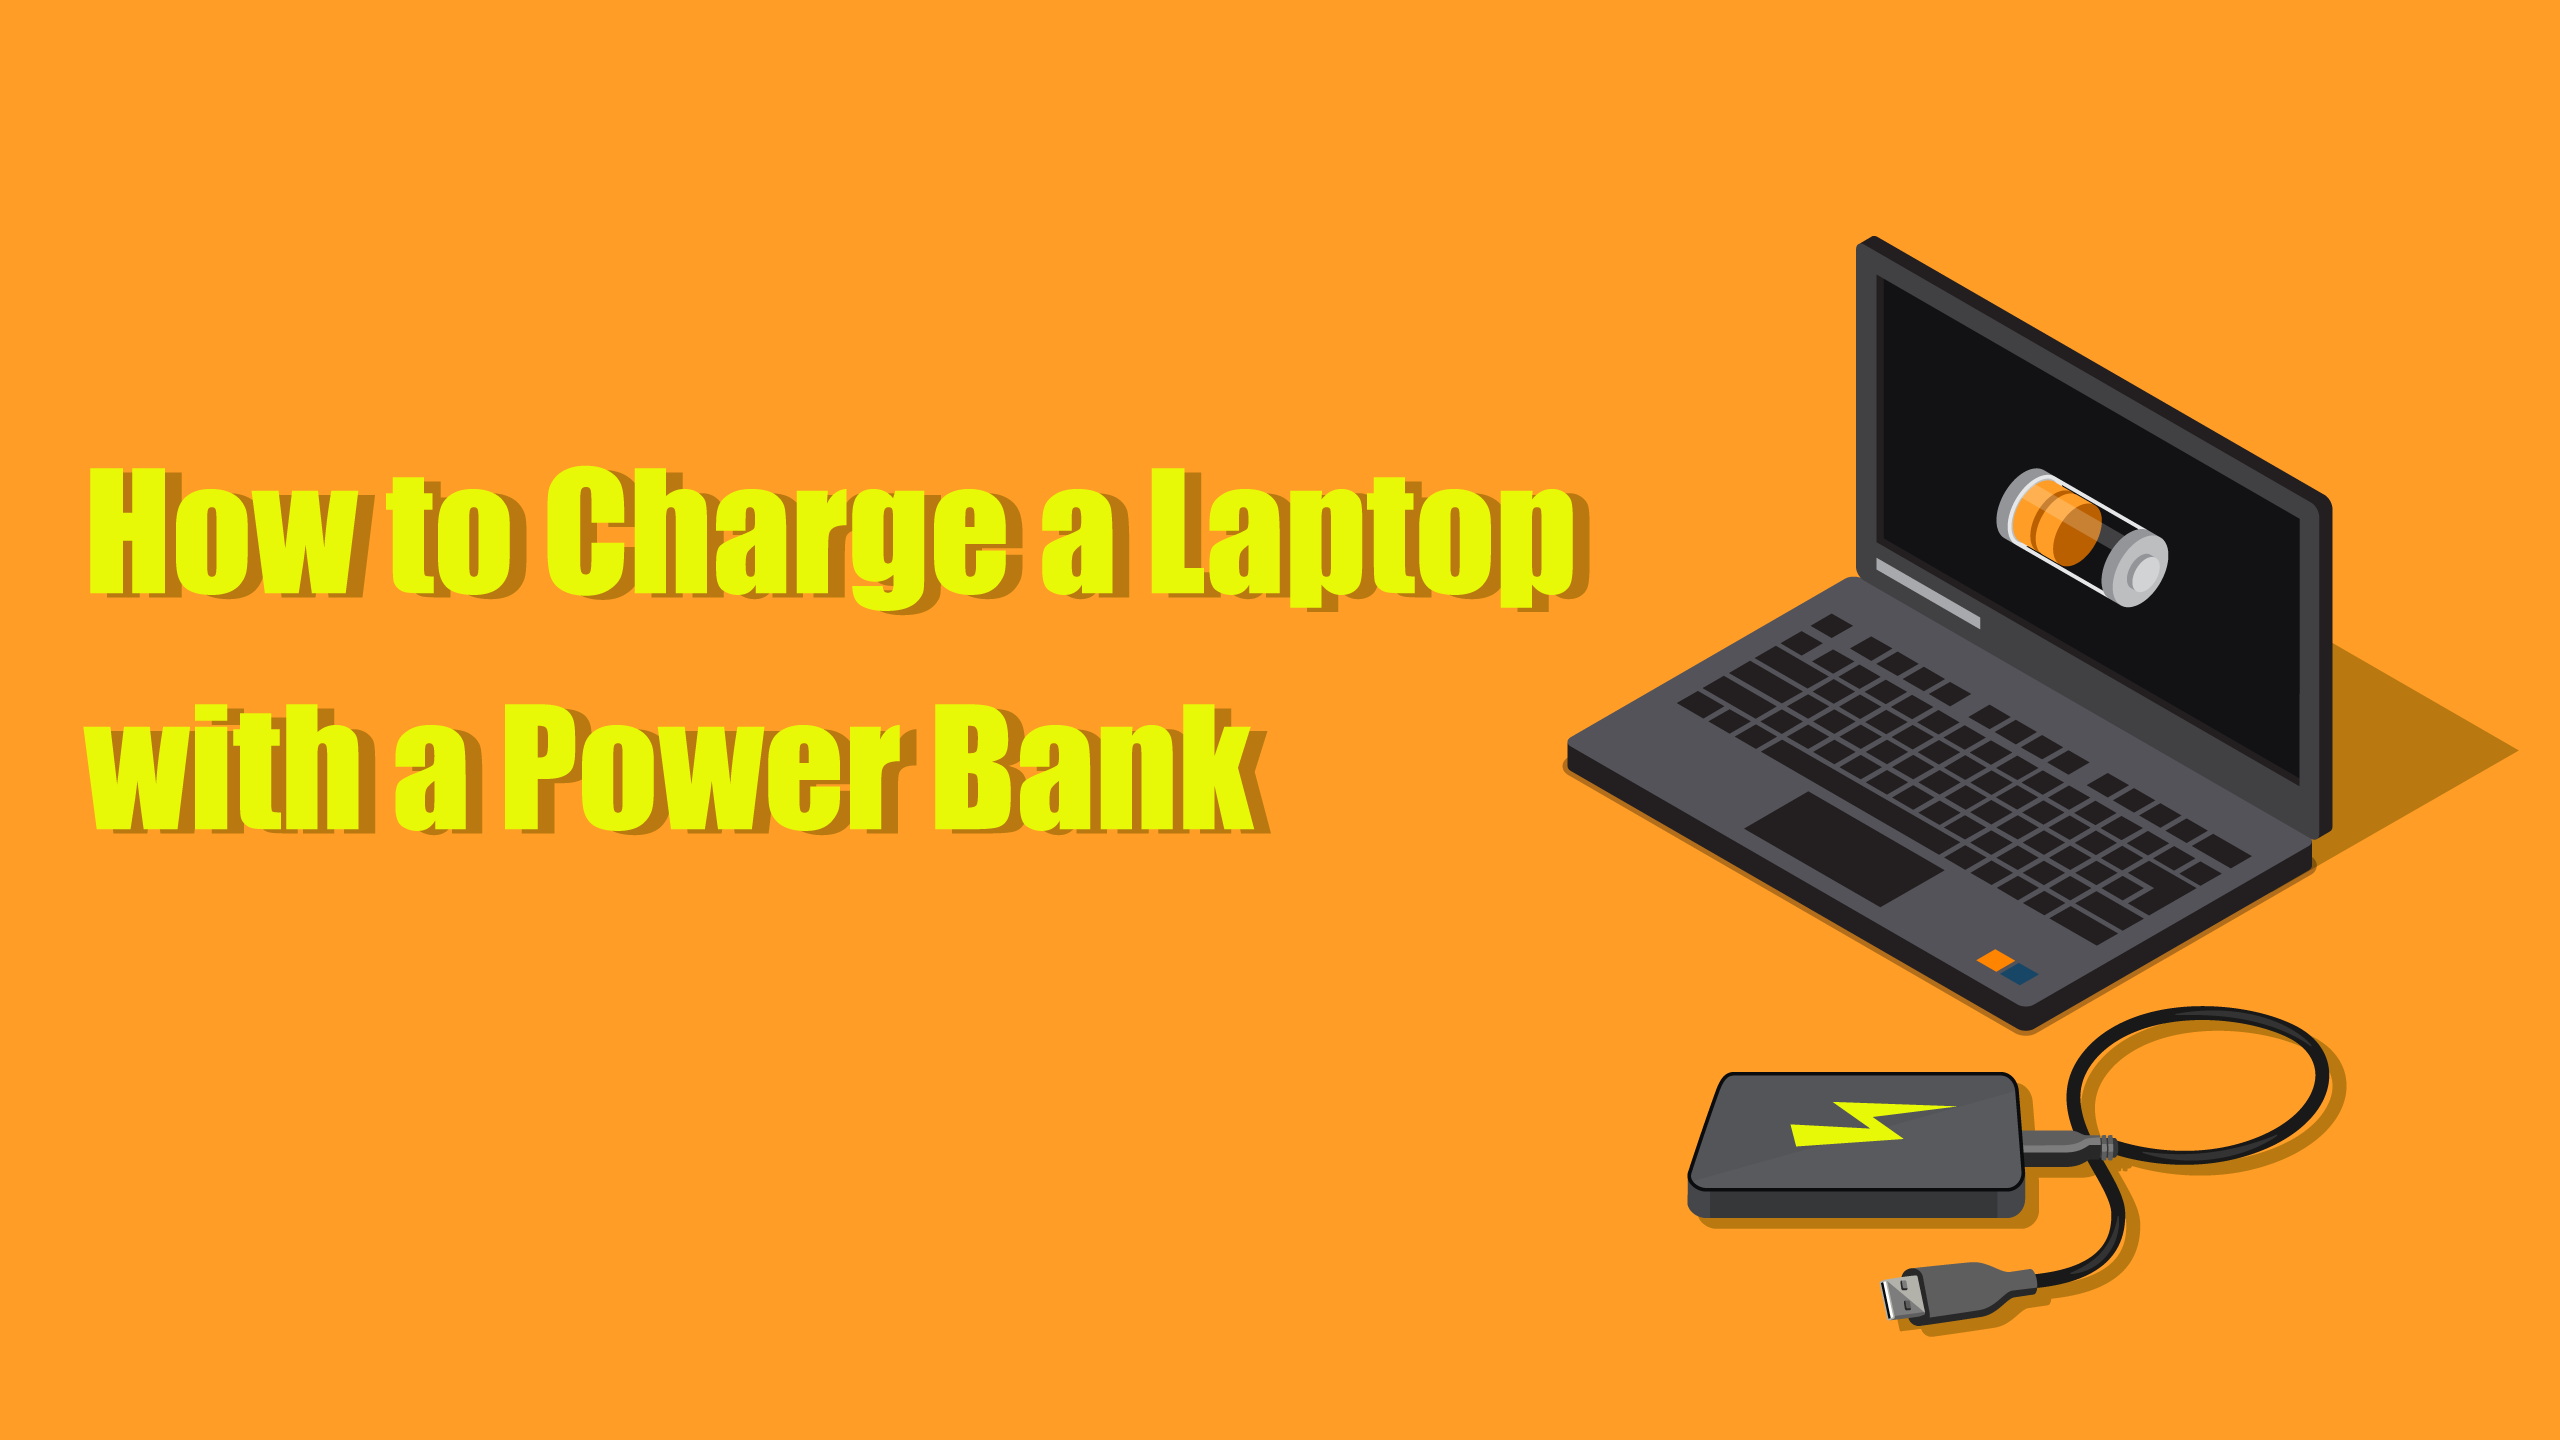 How To Charge A Laptop With A Power Bank